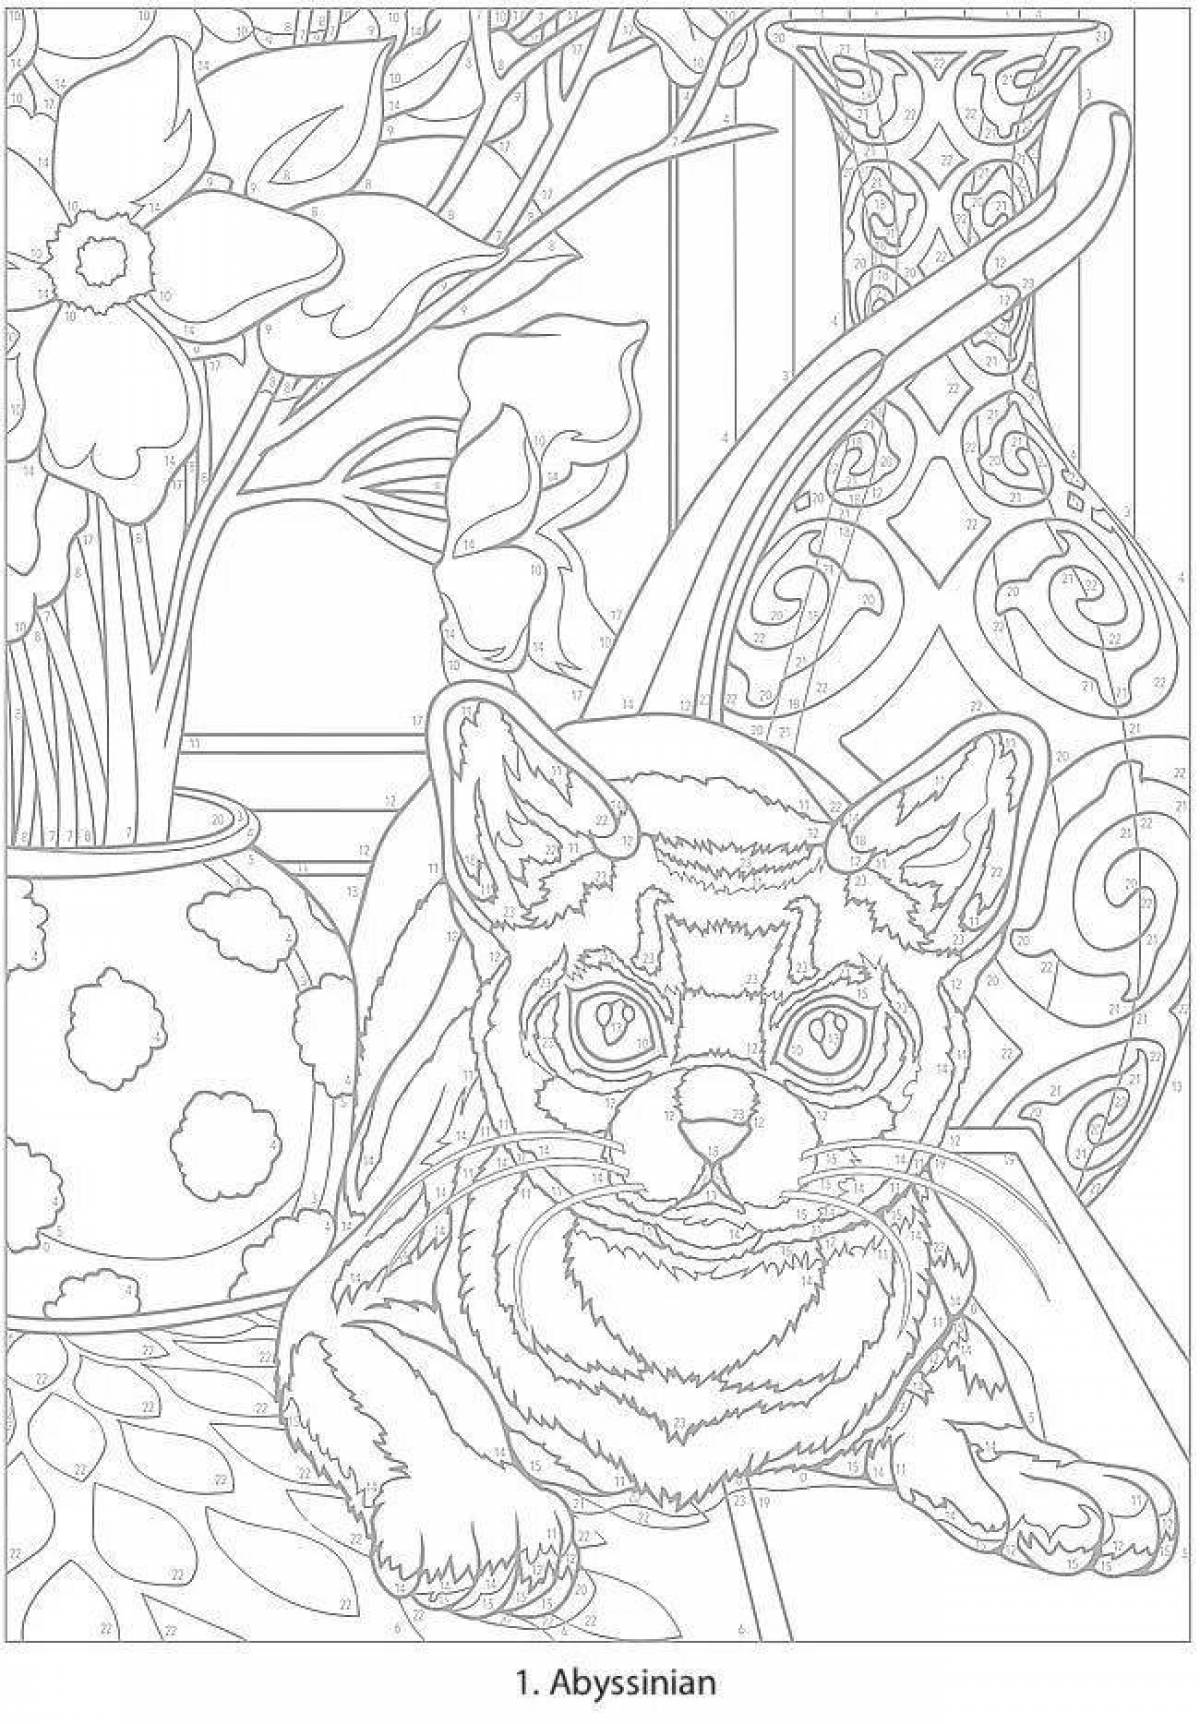 Glamorous cat coloring by numbers